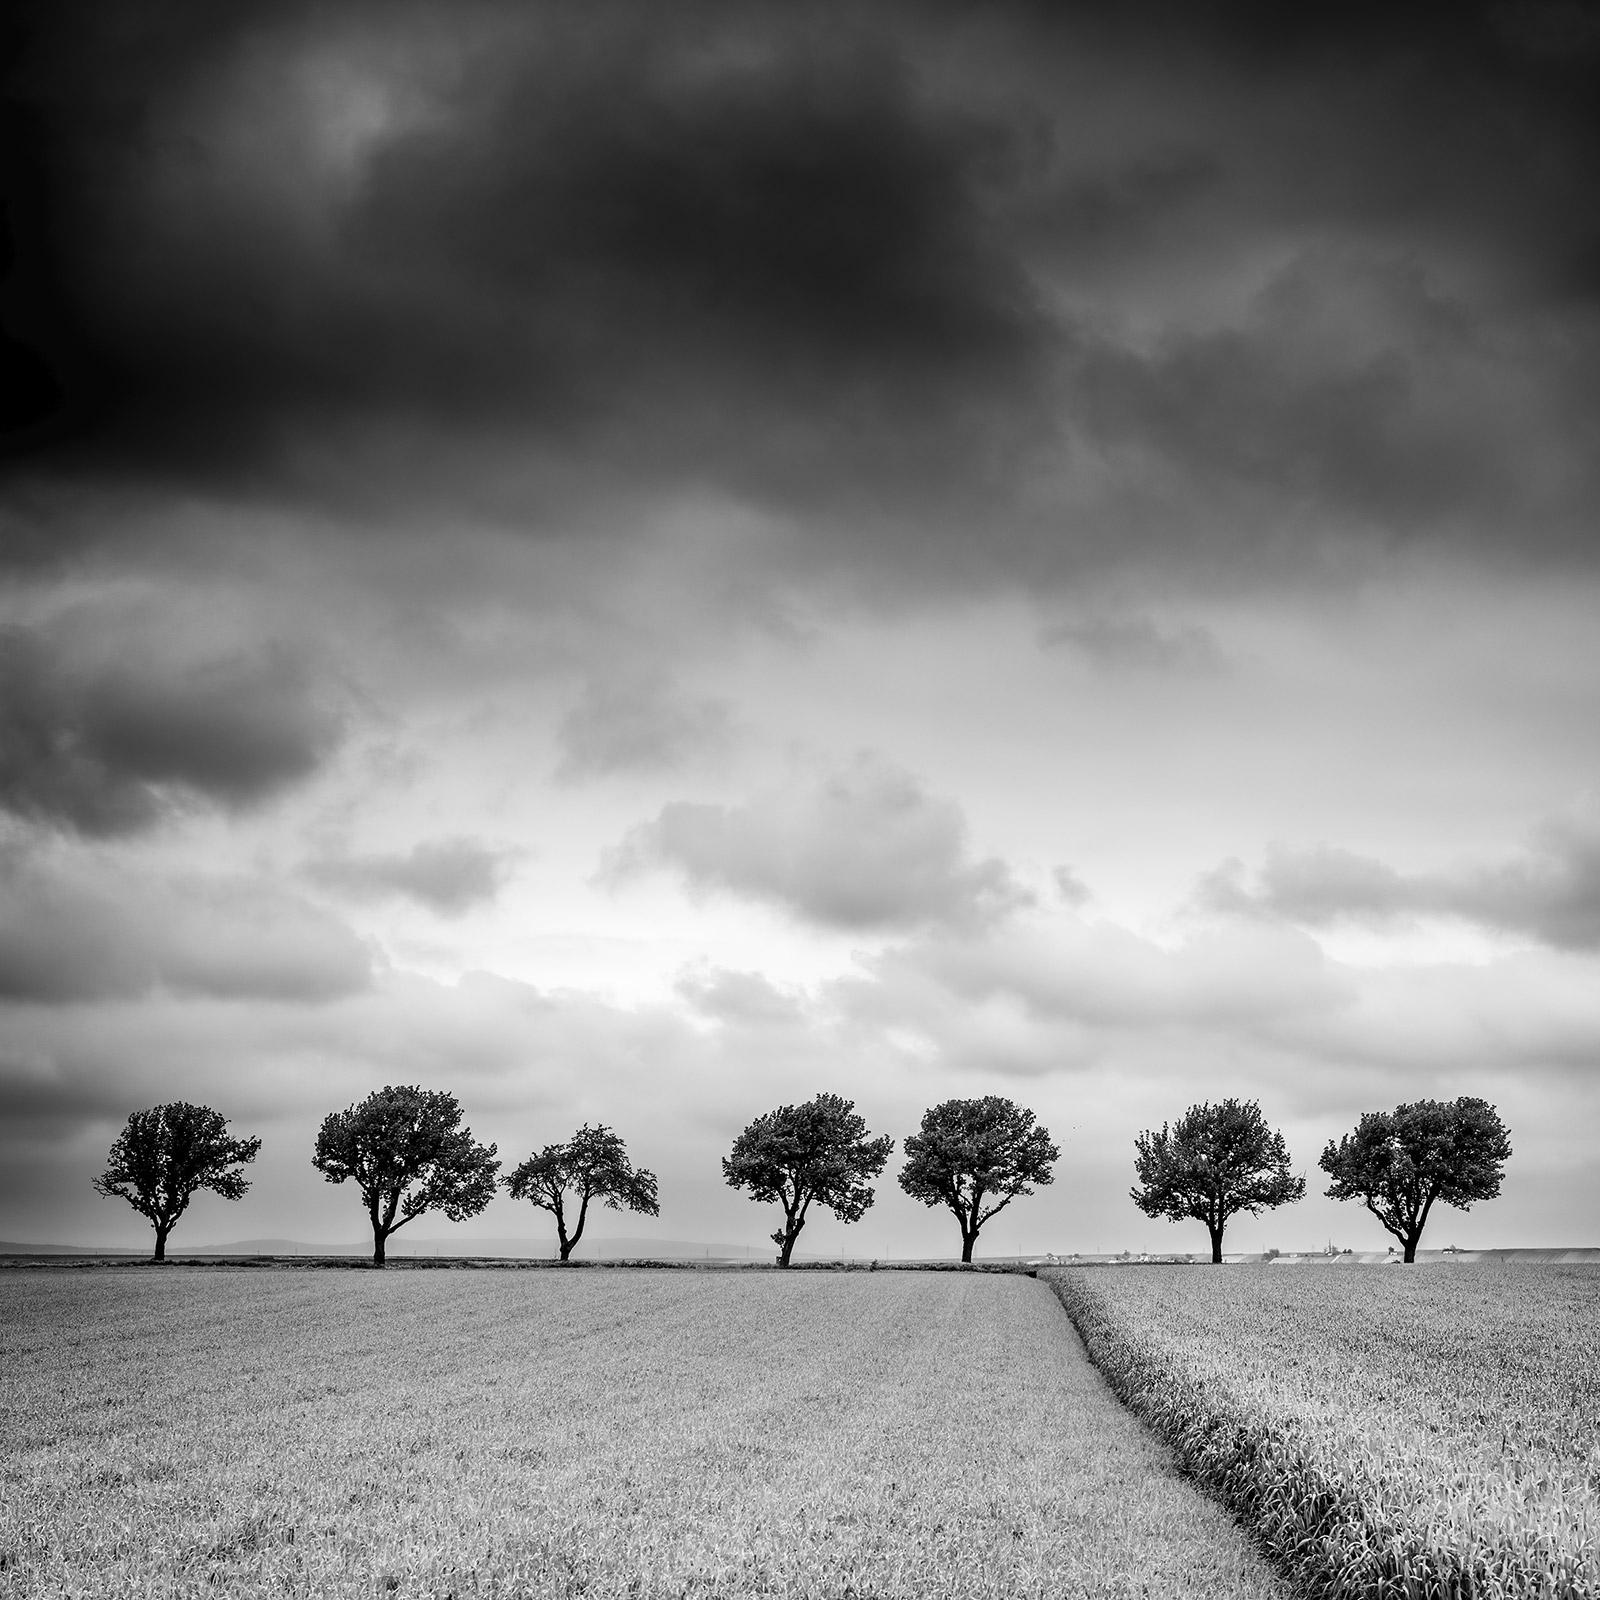 Gerald Berghammer Landscape Print - Trees on the edge of Field, cloudy, storm, black white art landscape photography